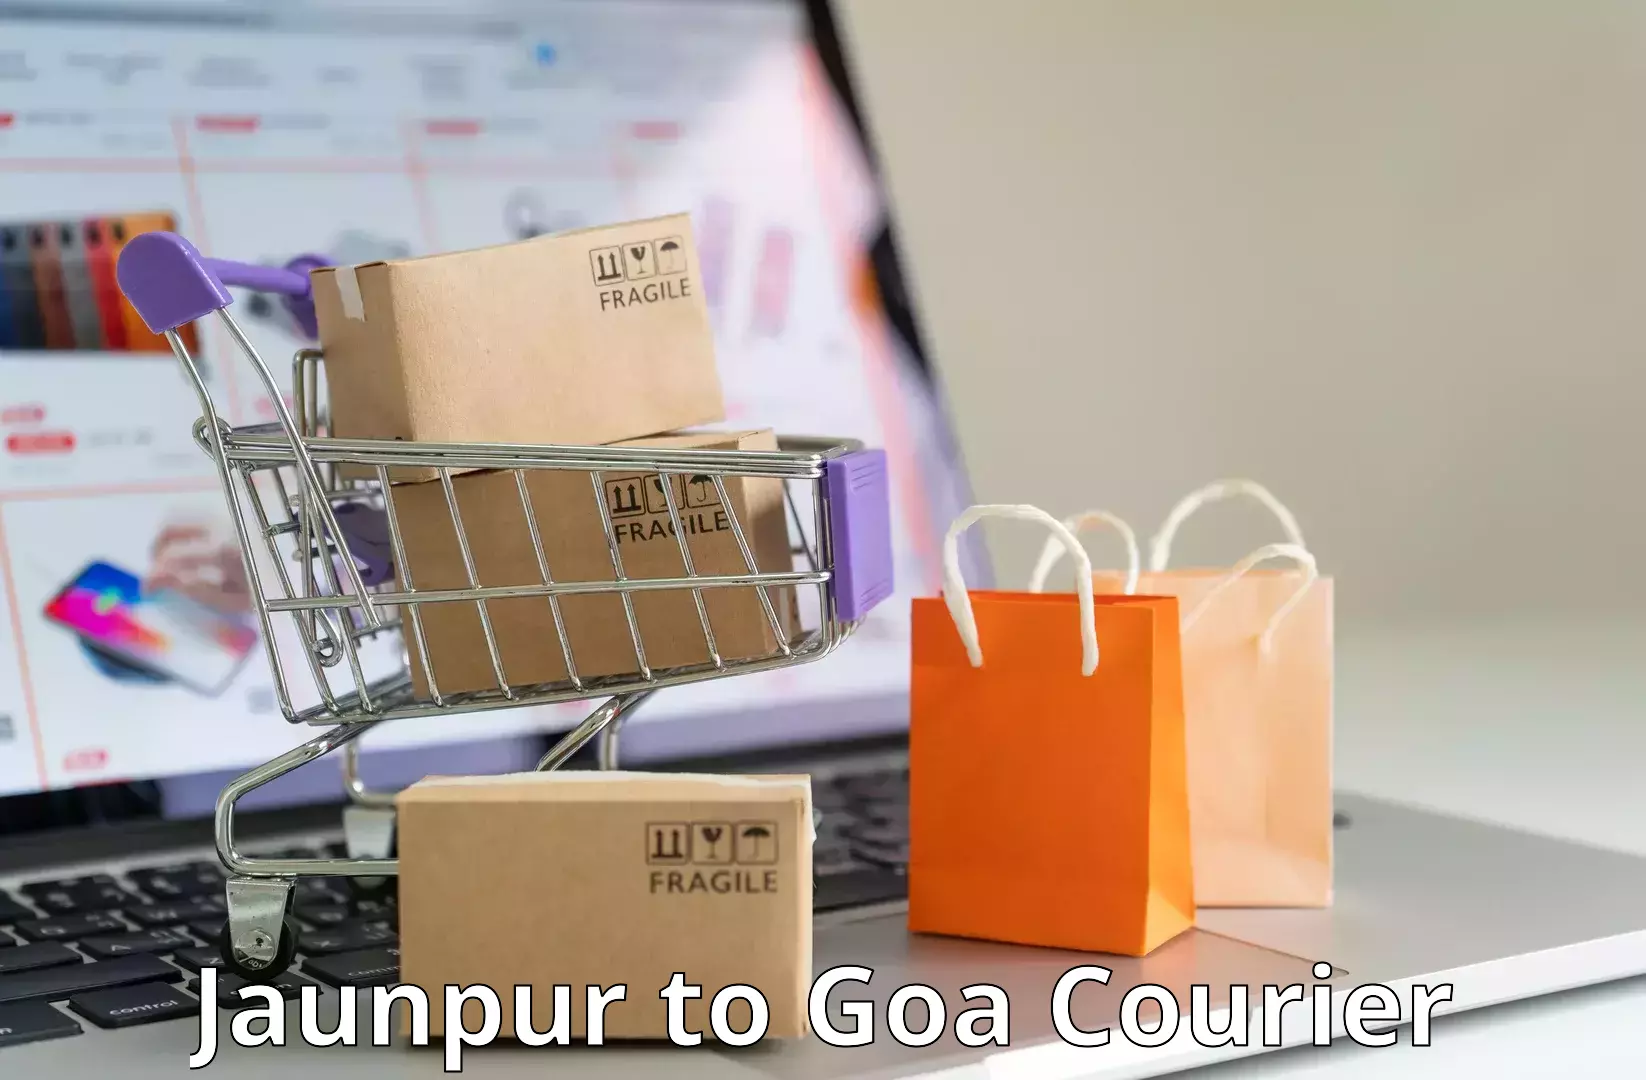 Sustainable courier practices Jaunpur to Panaji